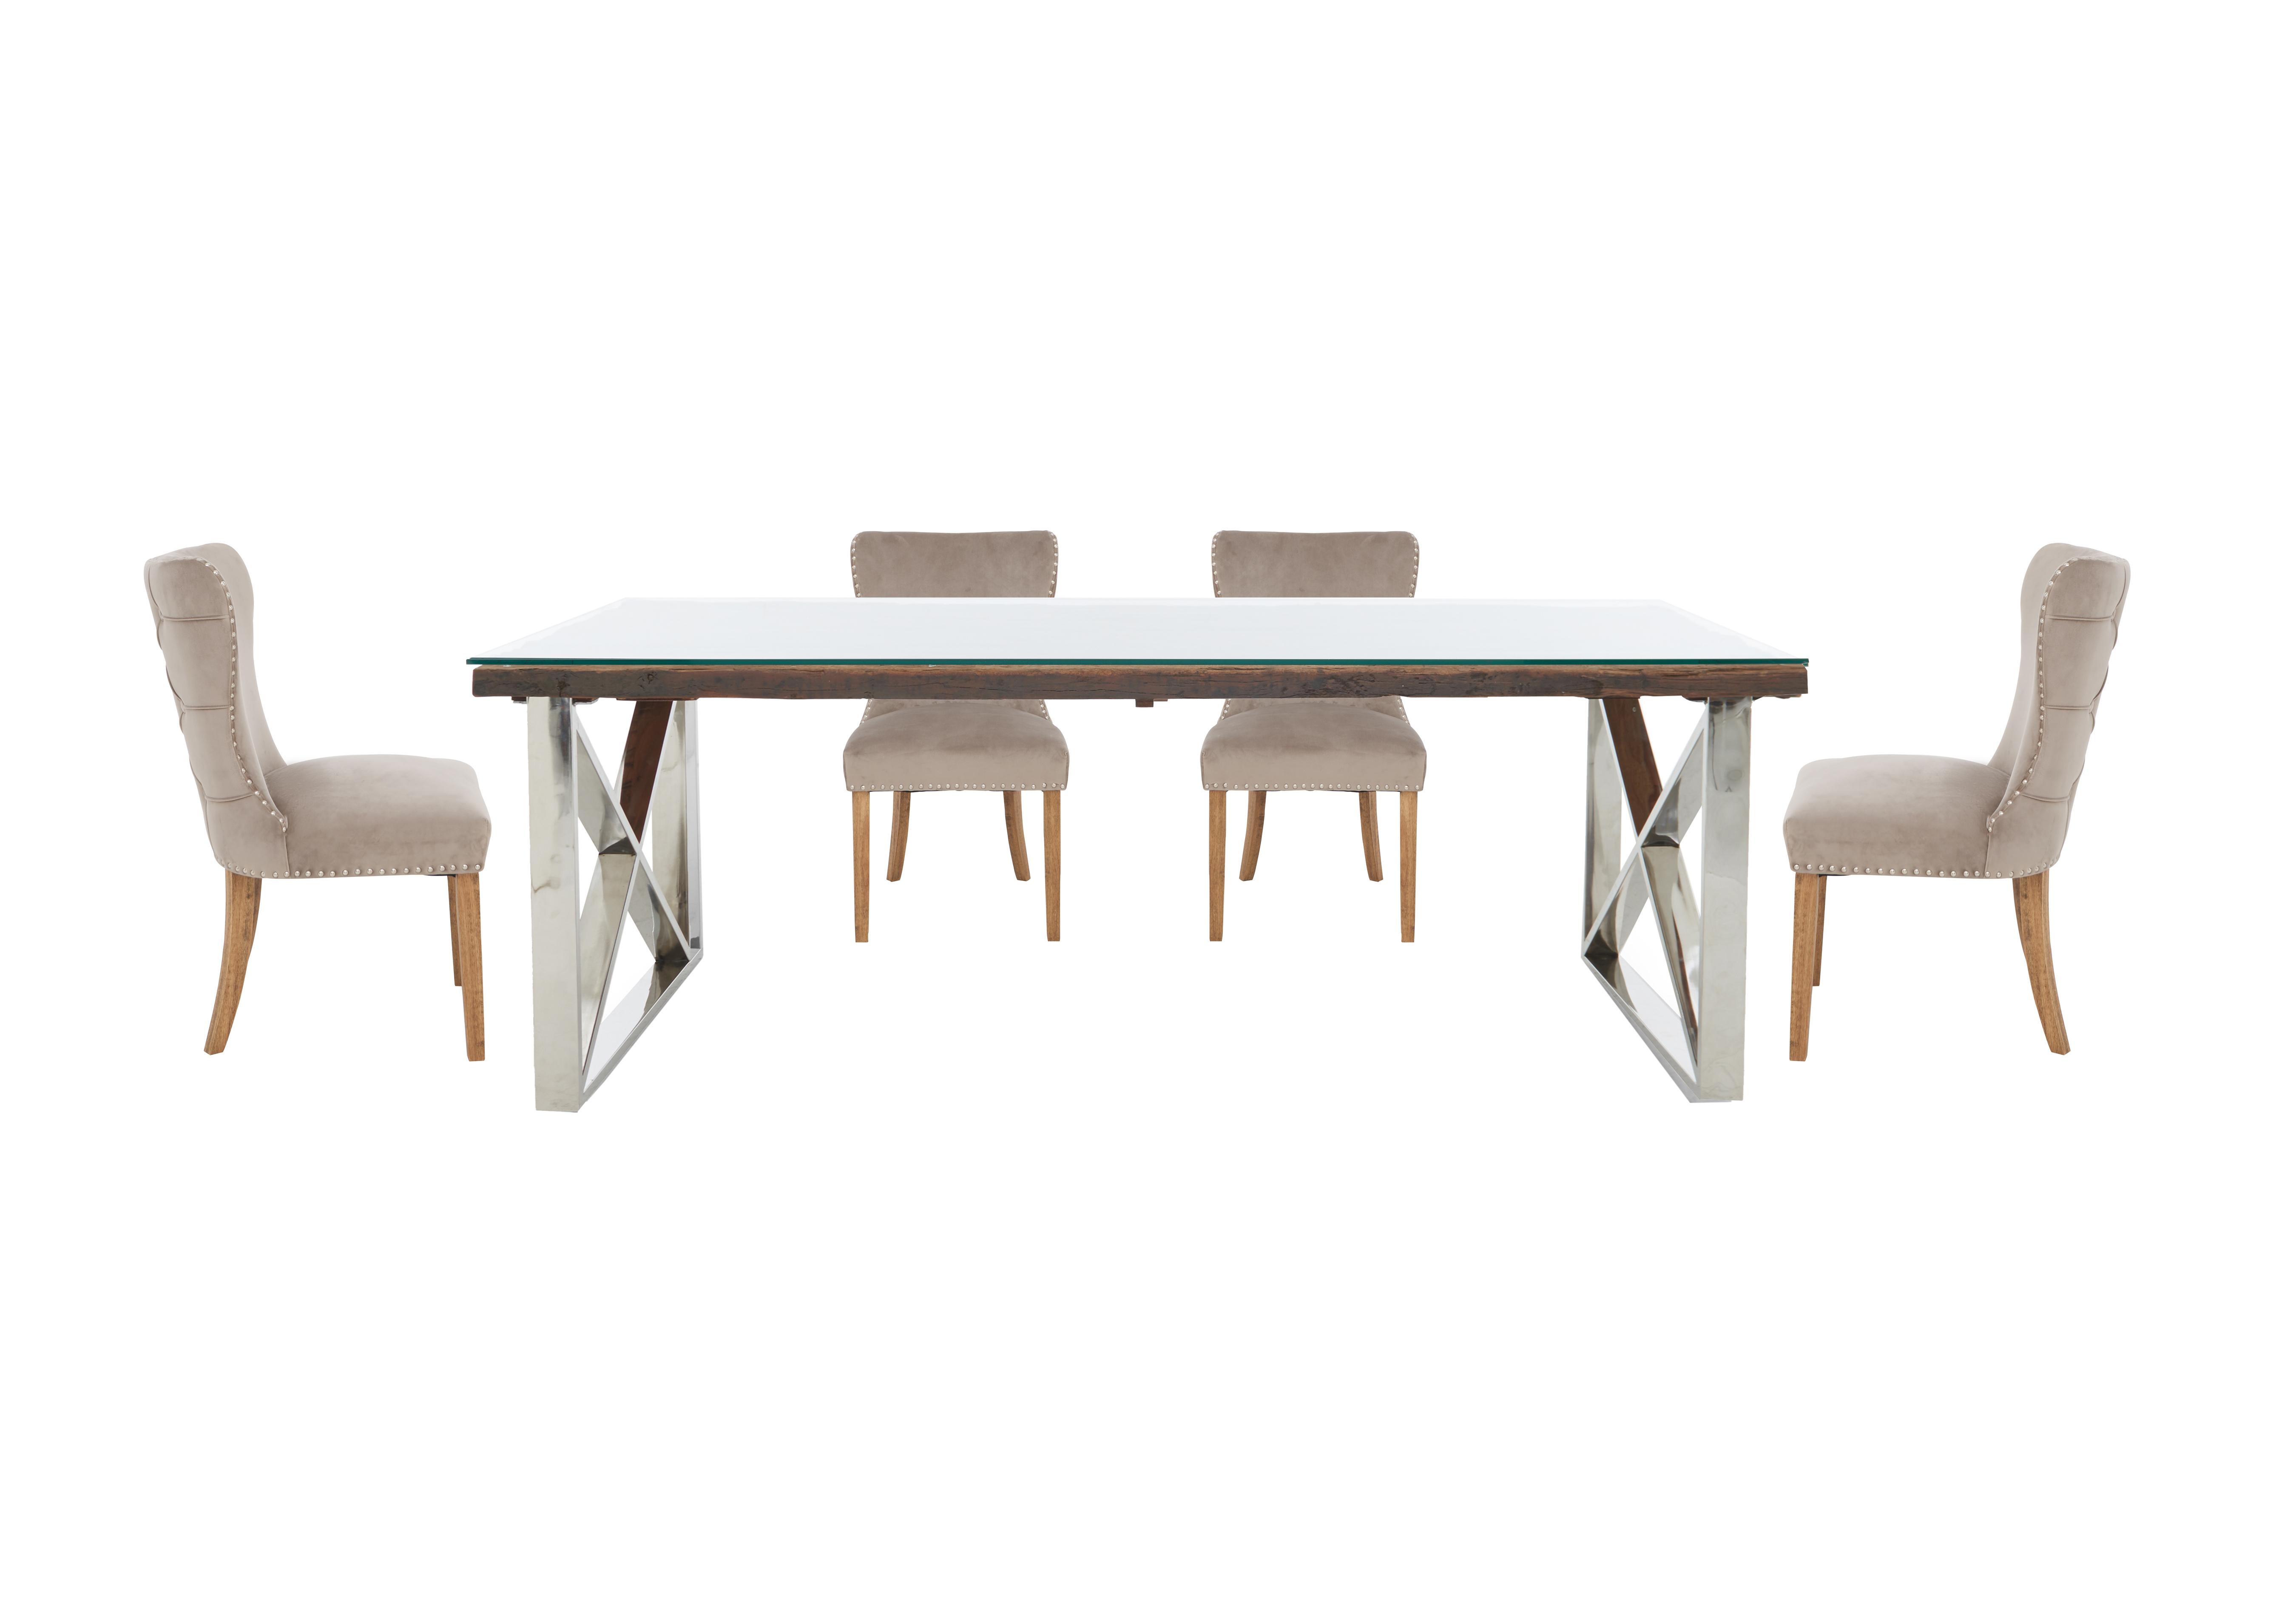 Chennai Dining Table with X-Leg Base and 4 Luxe Dining Chairs in Taupe on Furniture Village